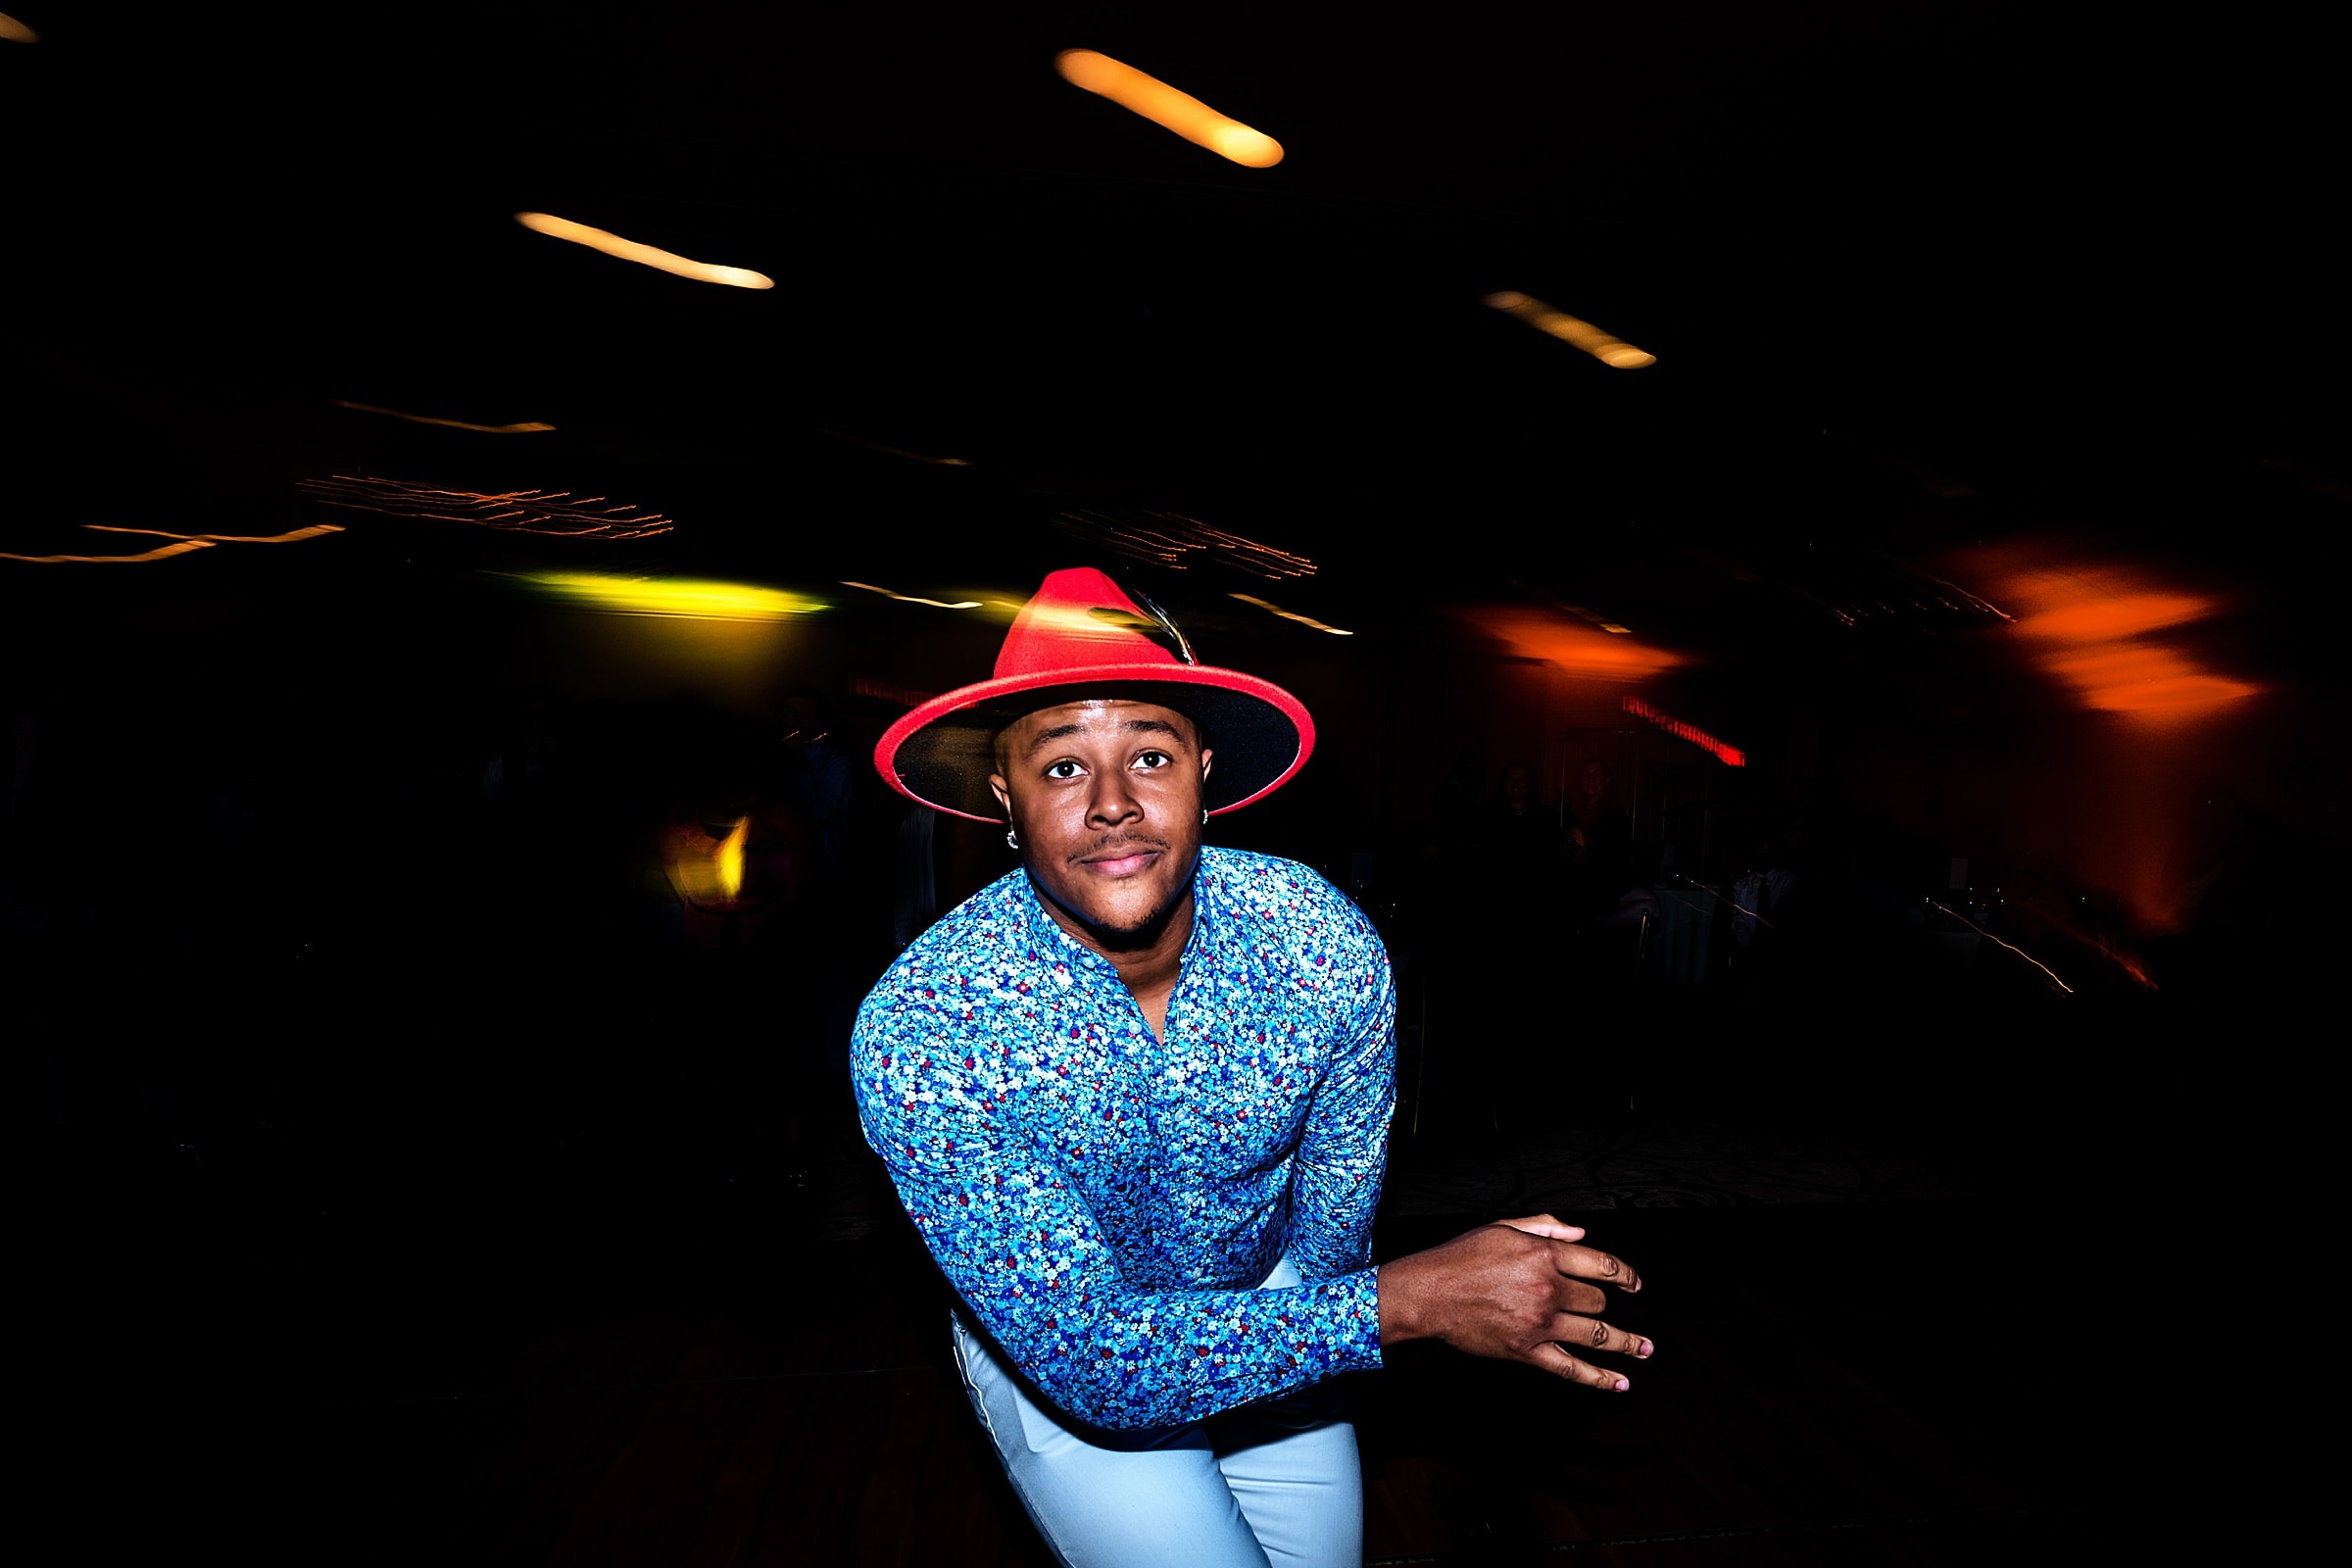 Fun dance floor at a wedding with lots of 90s hiphop and R&B | photos by Kivus & Camera